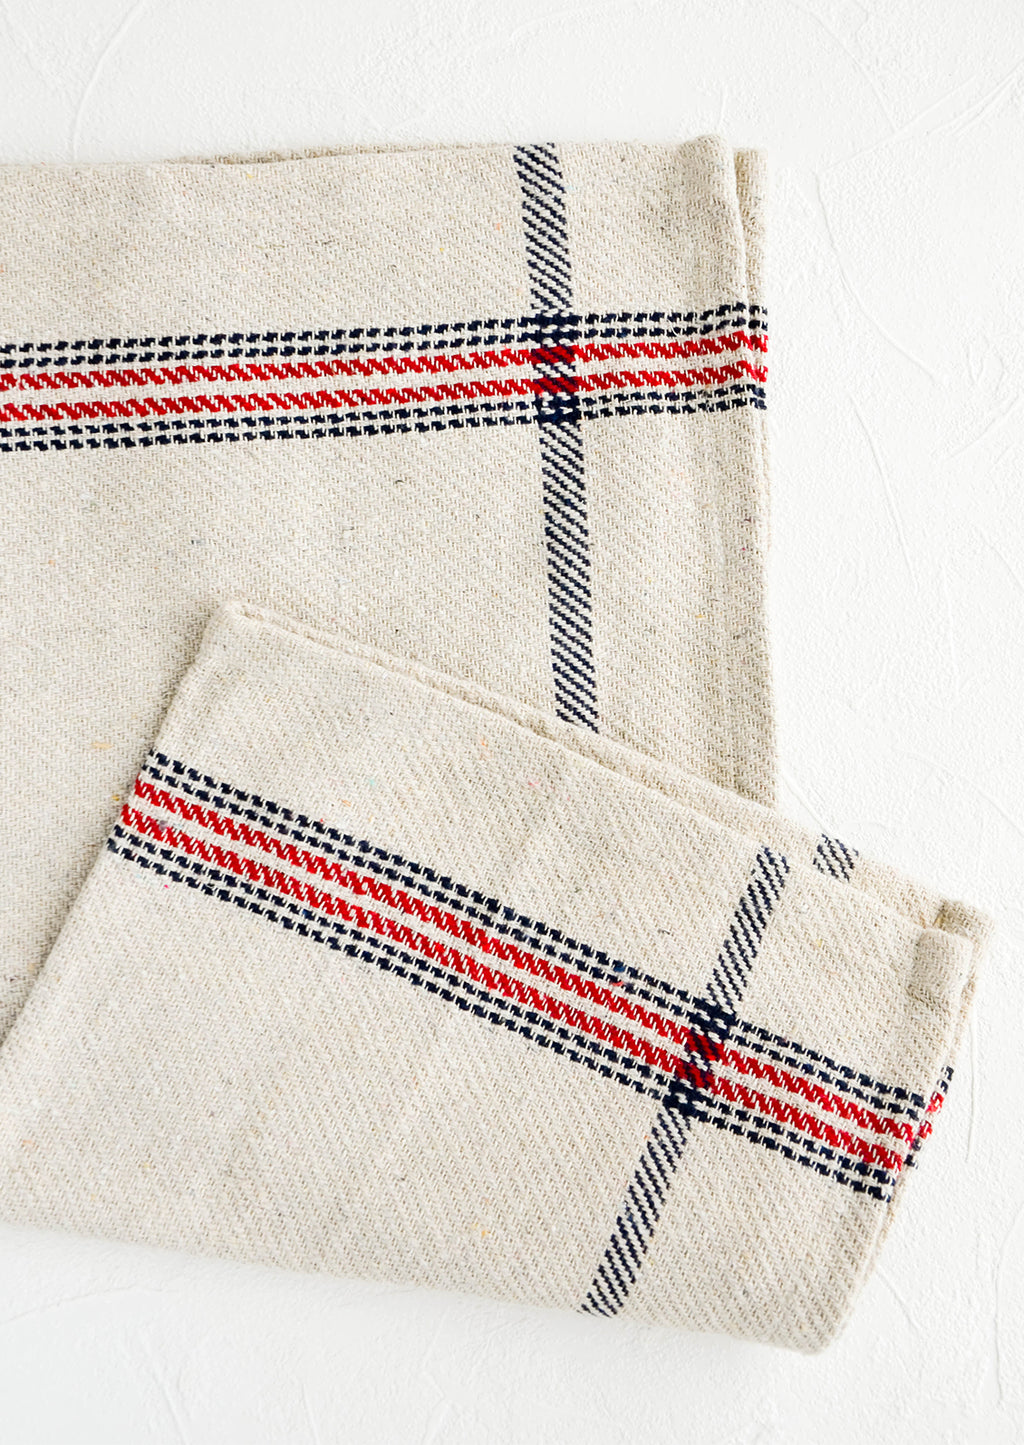 Natural / Red / Navy: Thick woven cotton kitchen towel in natural with blue and navy plaid stripe